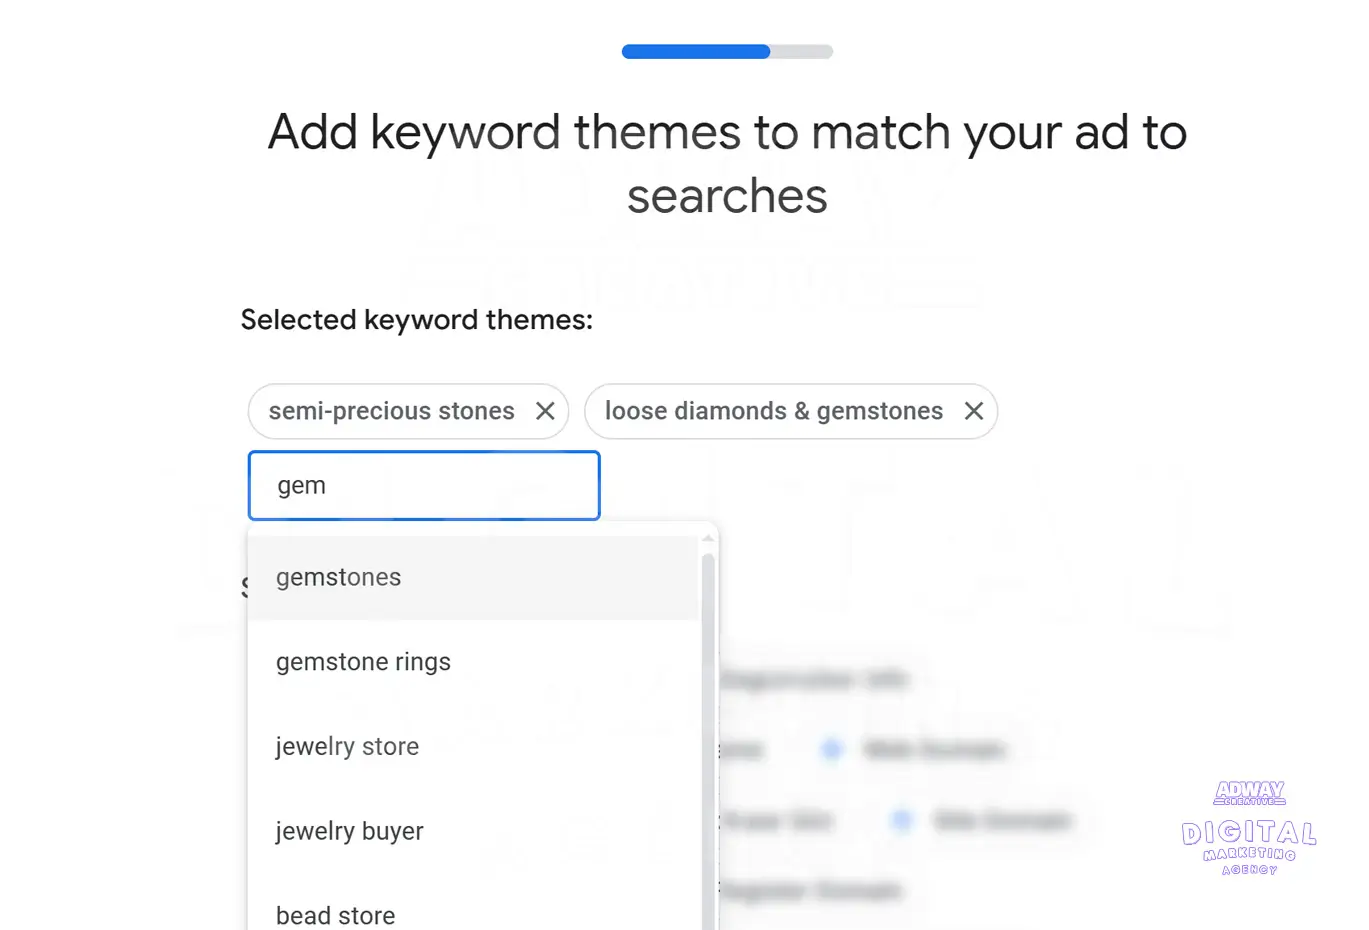 Select keyword themes related to your business to help match your ad with relevant searches. 